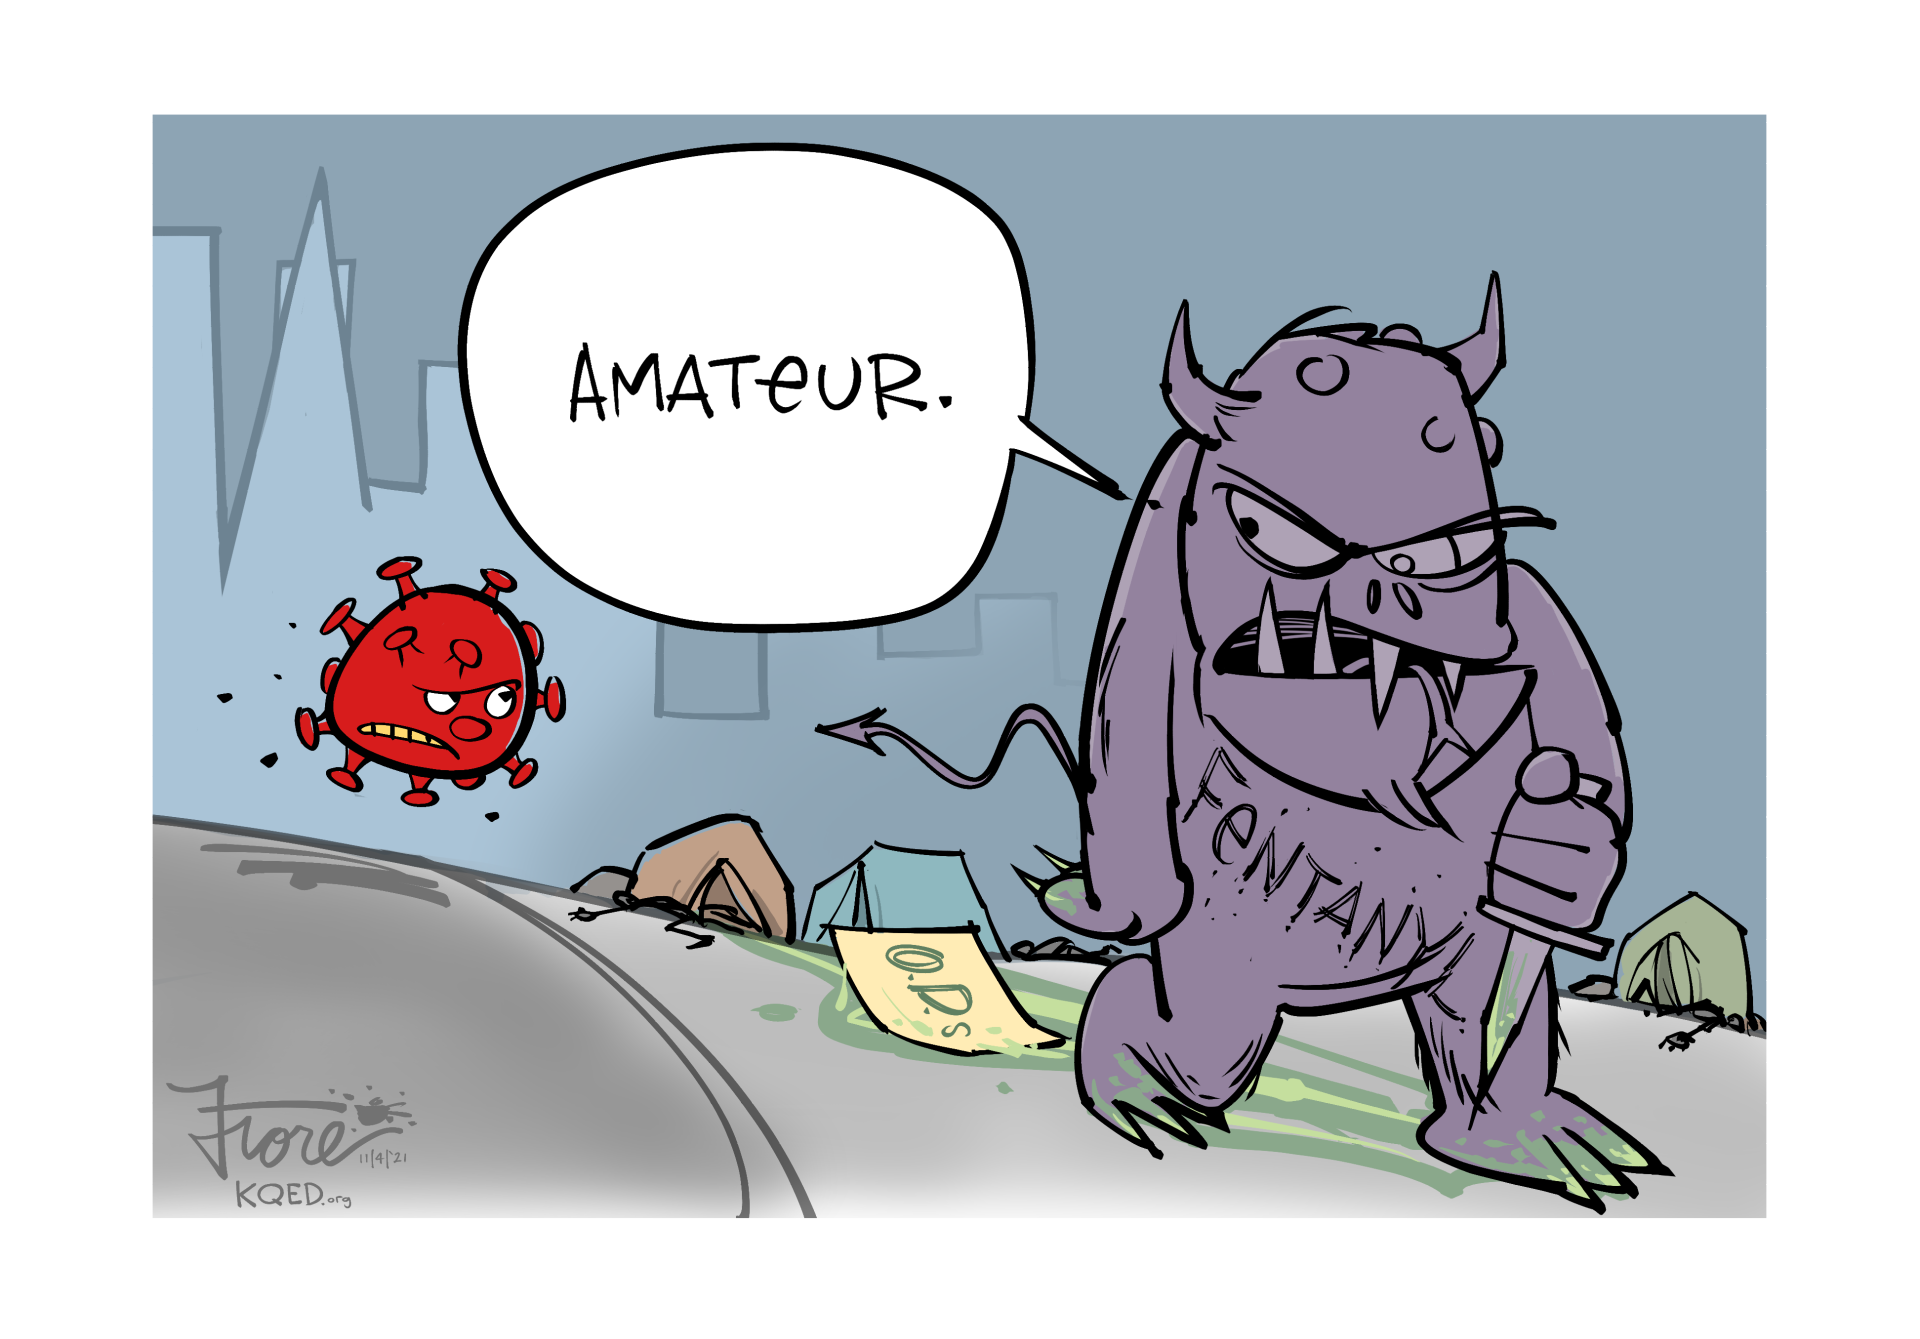 Cartoon: A bright red COVID character hovers over the street as a monstrous purple "fentanyl" character looks at COVID and says "amateur." We see homeless tents and "o.d." in the San Francisco background.